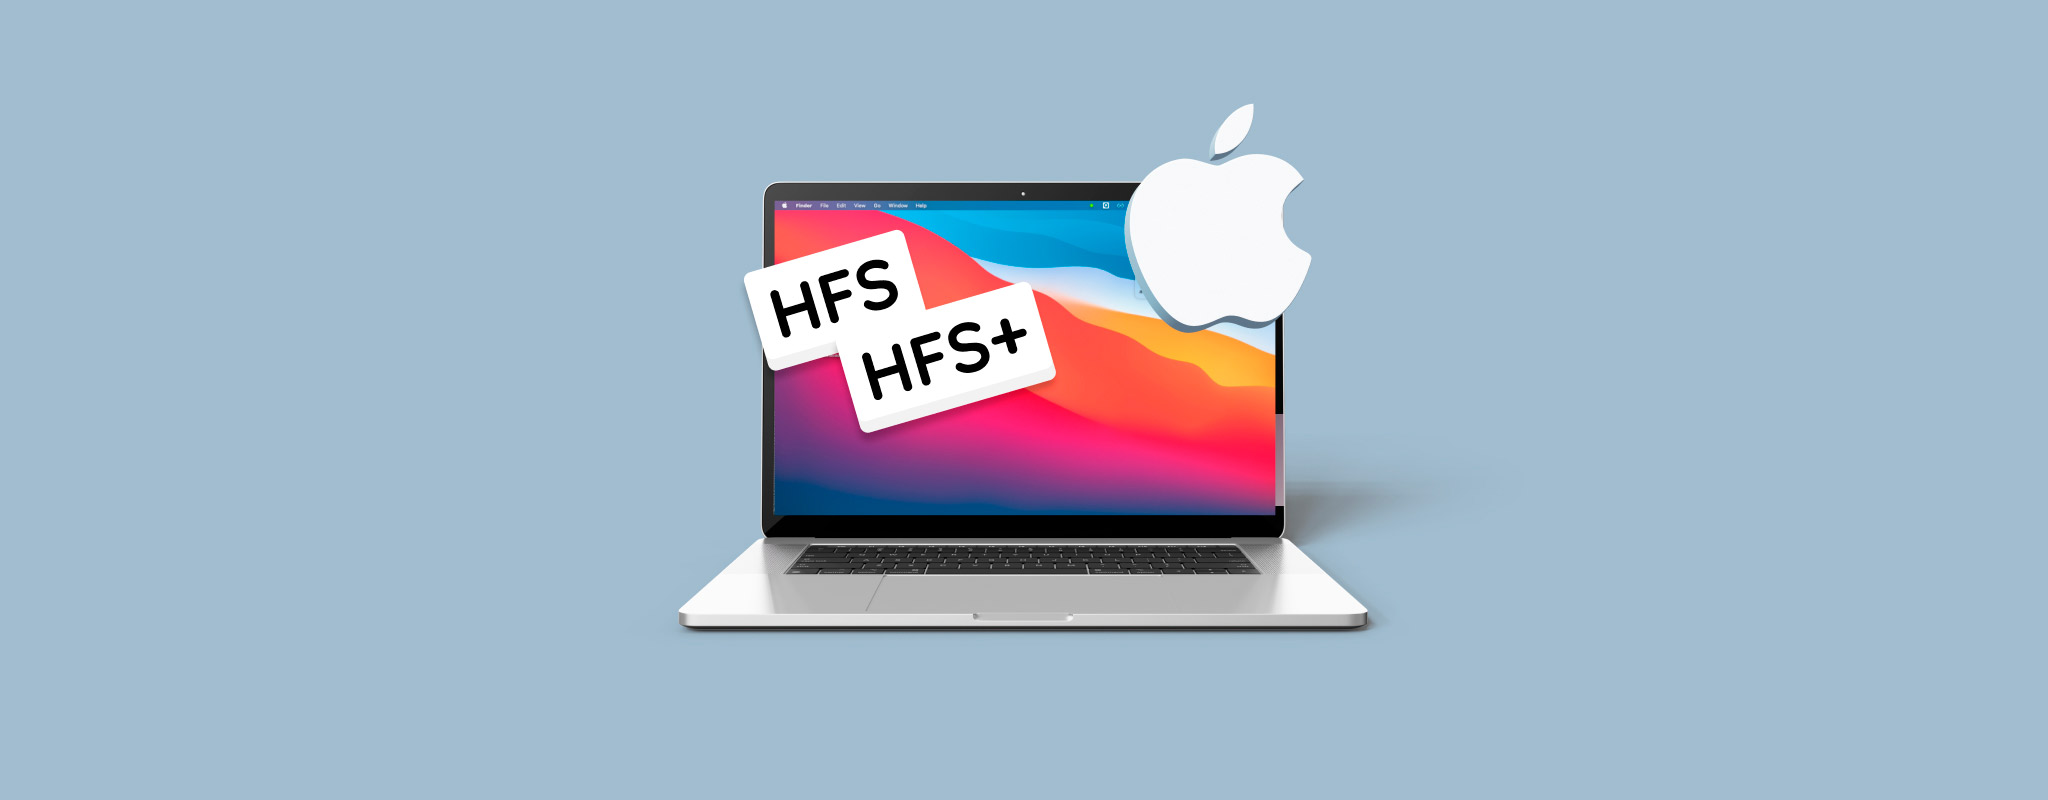 hfs recovery